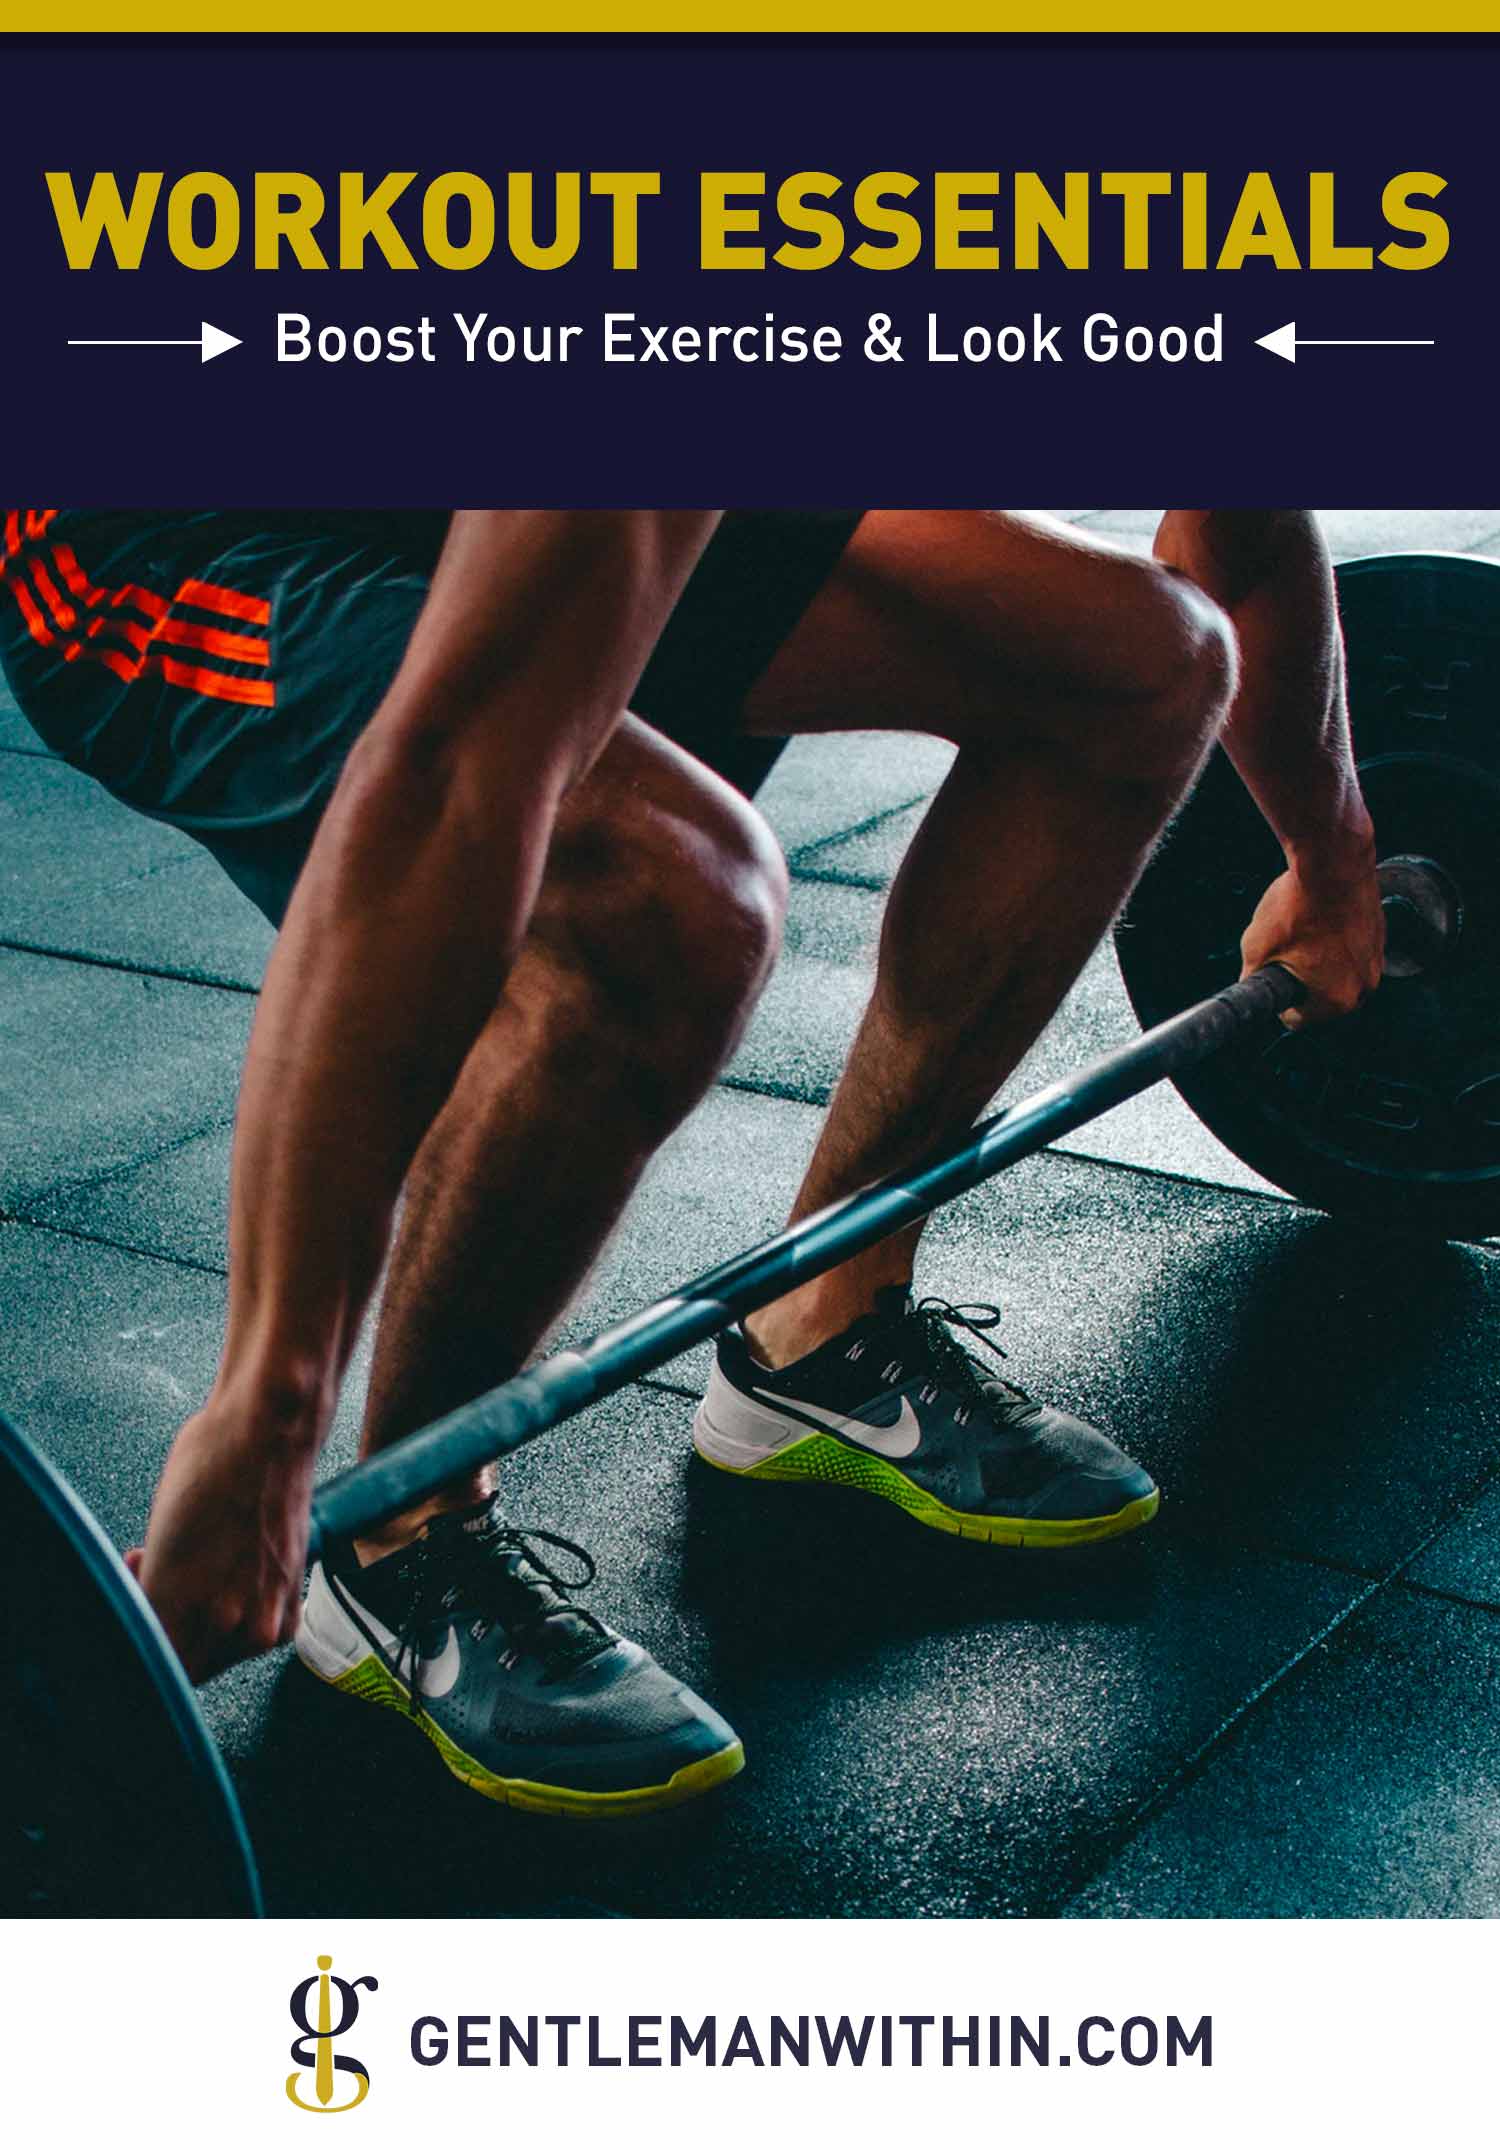 8 Workout Essentials to Boost Your Exercise and Look Good | GENTLEMAN WITHIN